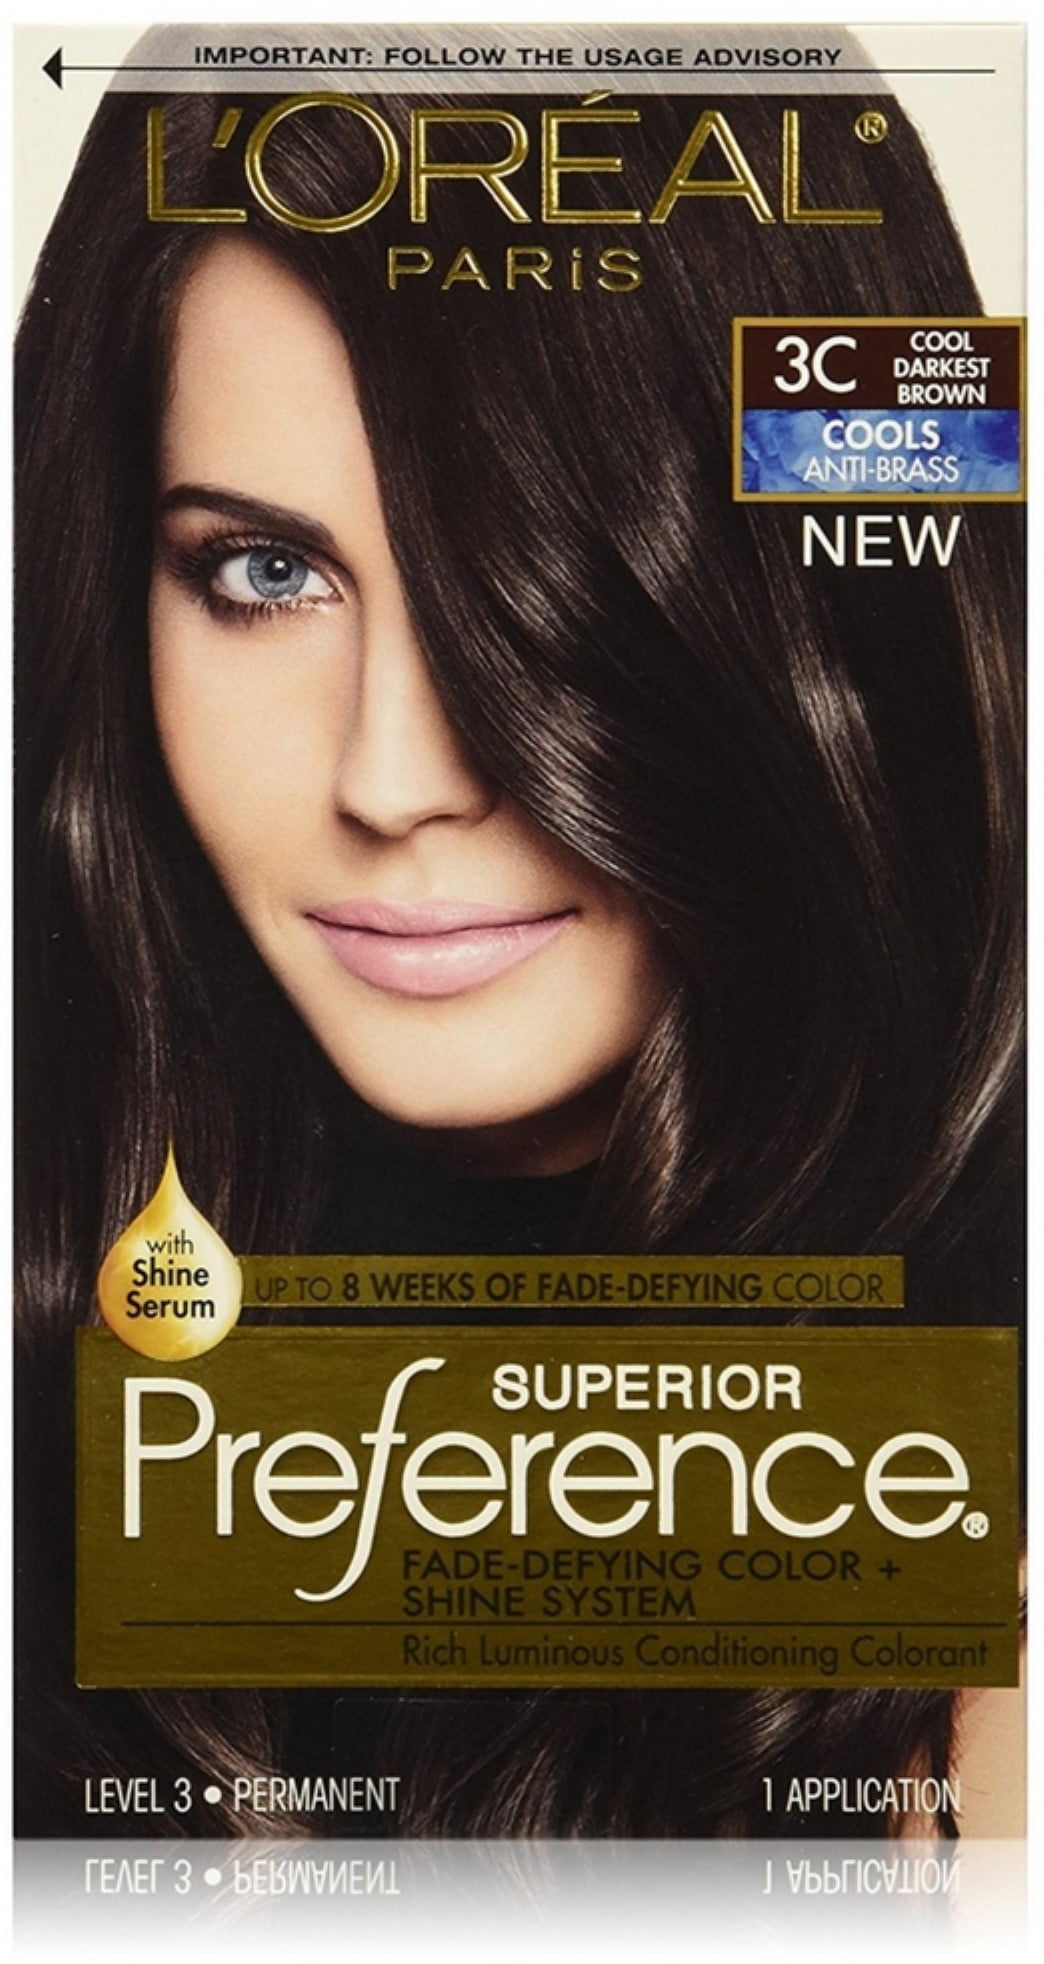 3 Pack - L'Oreal Superior Preference Fade-Defying Color + Shine System